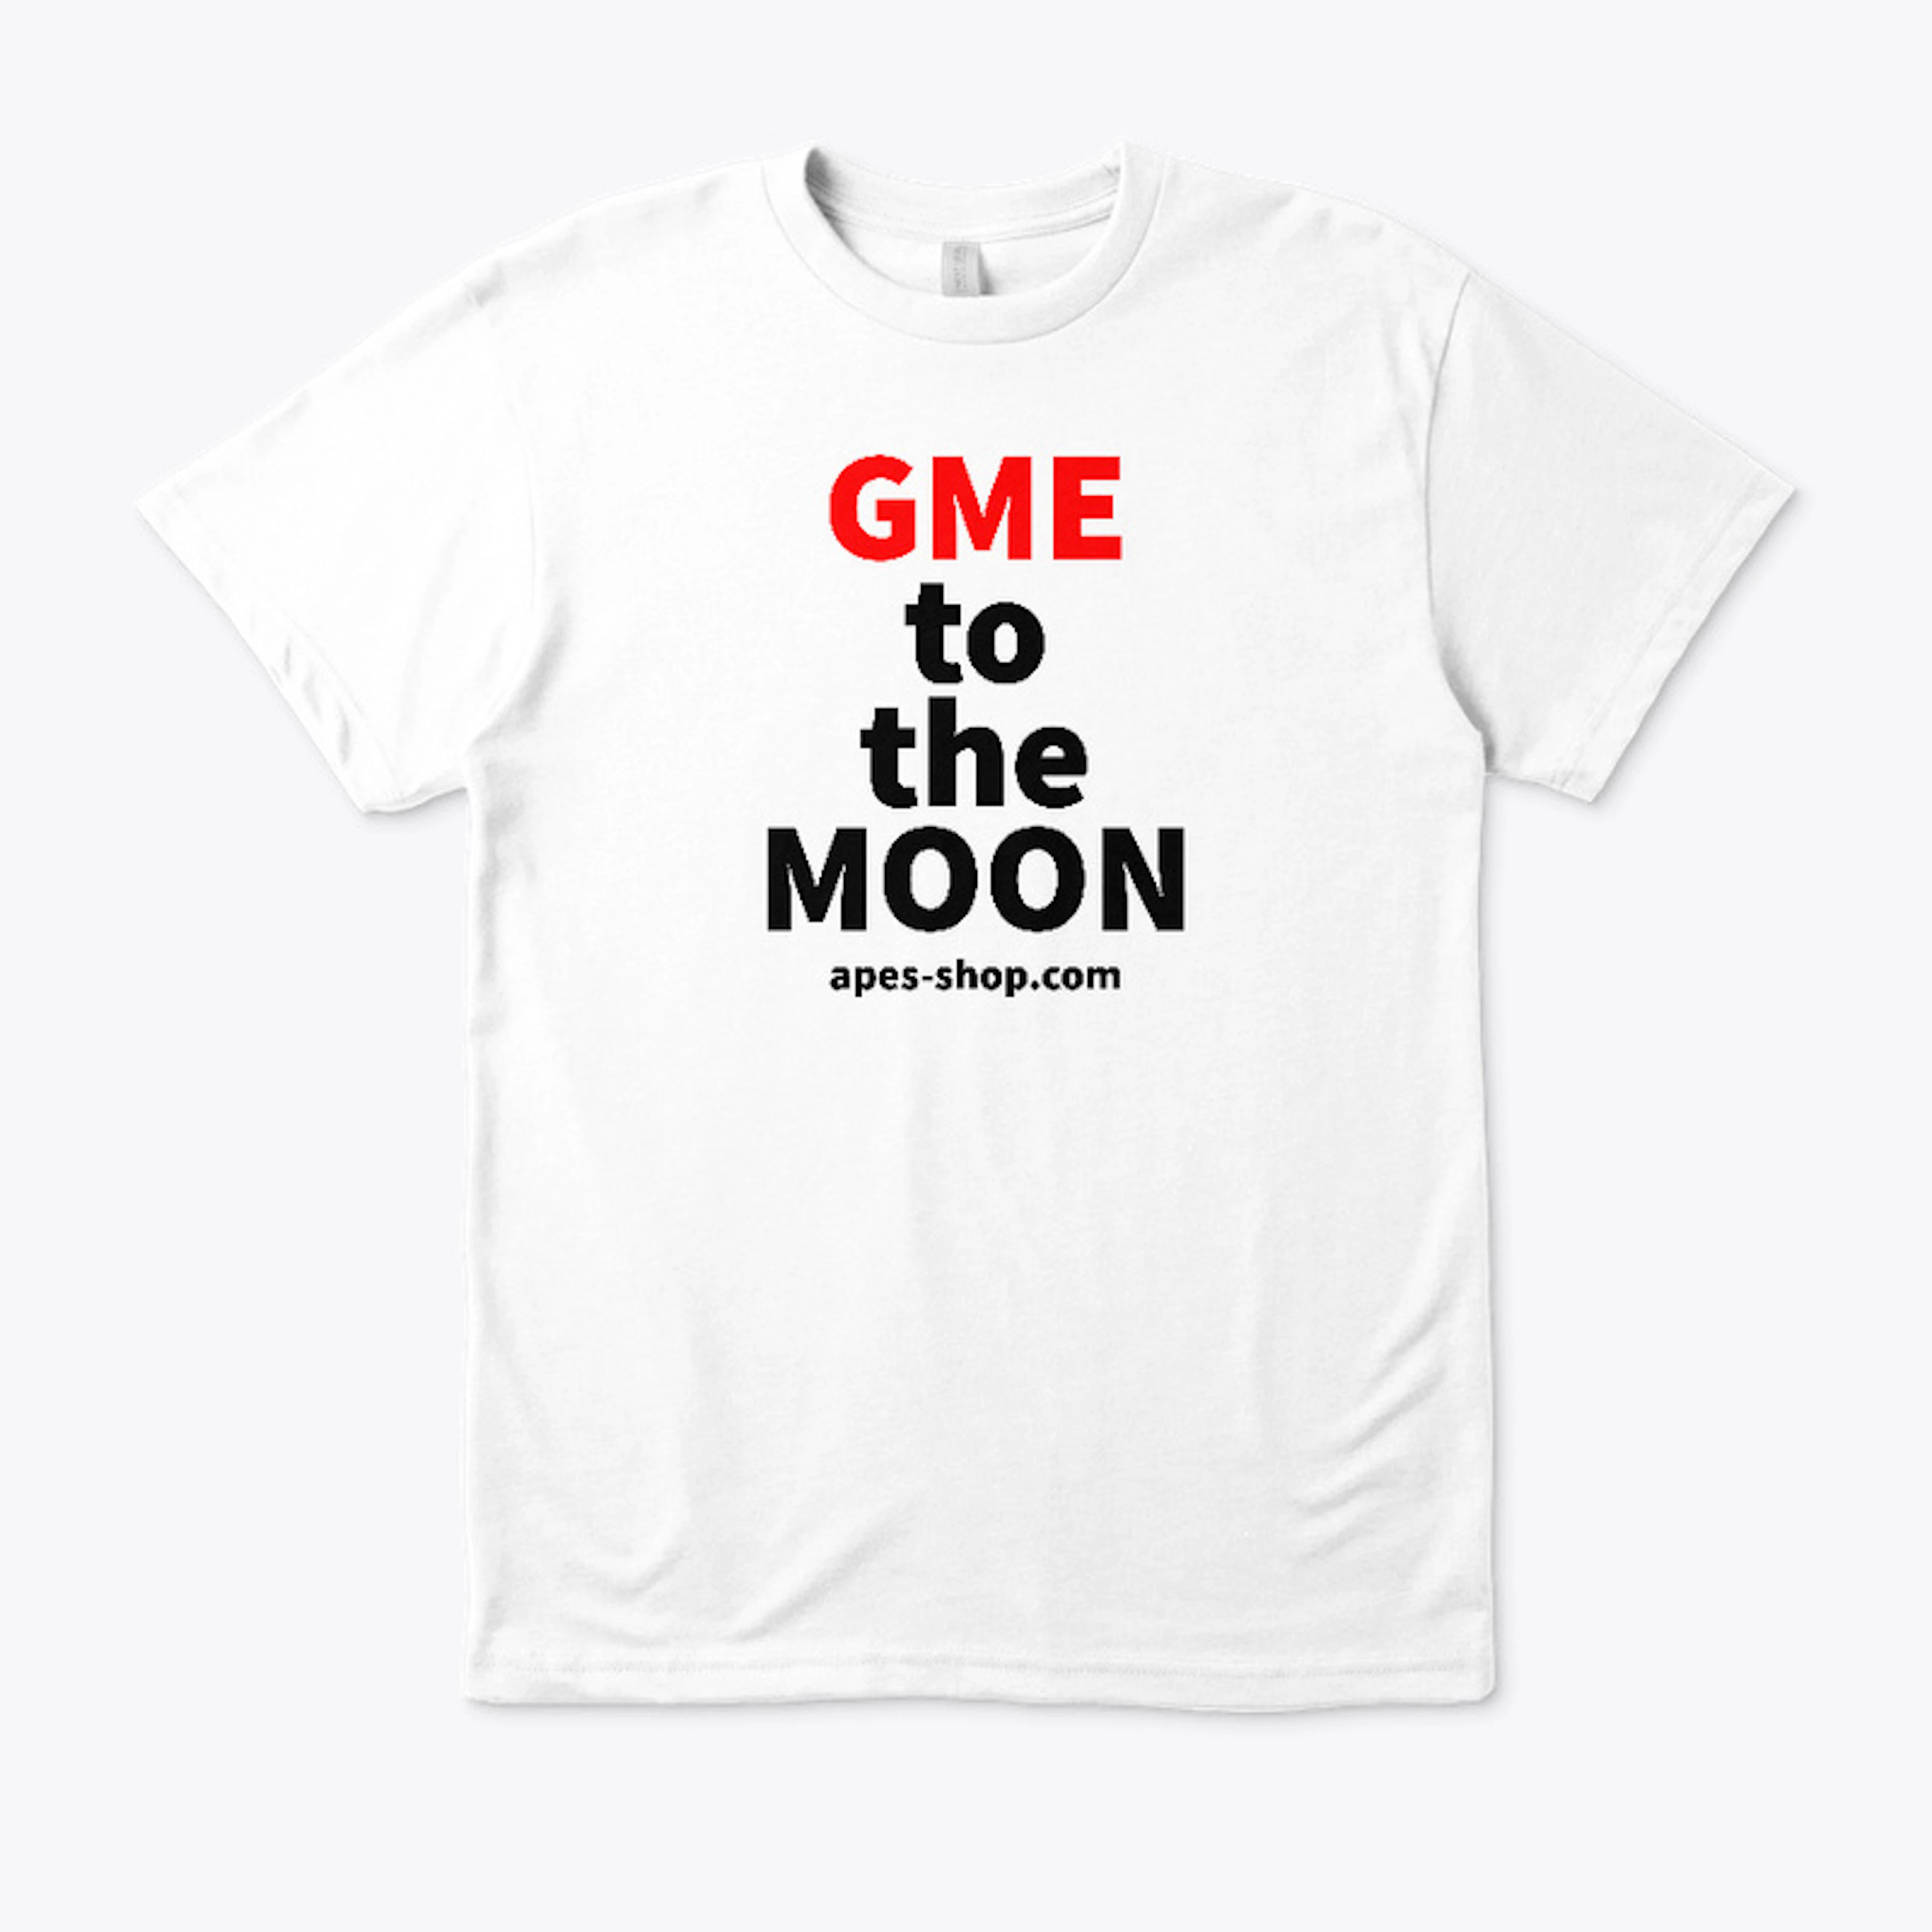 GME to the MOON